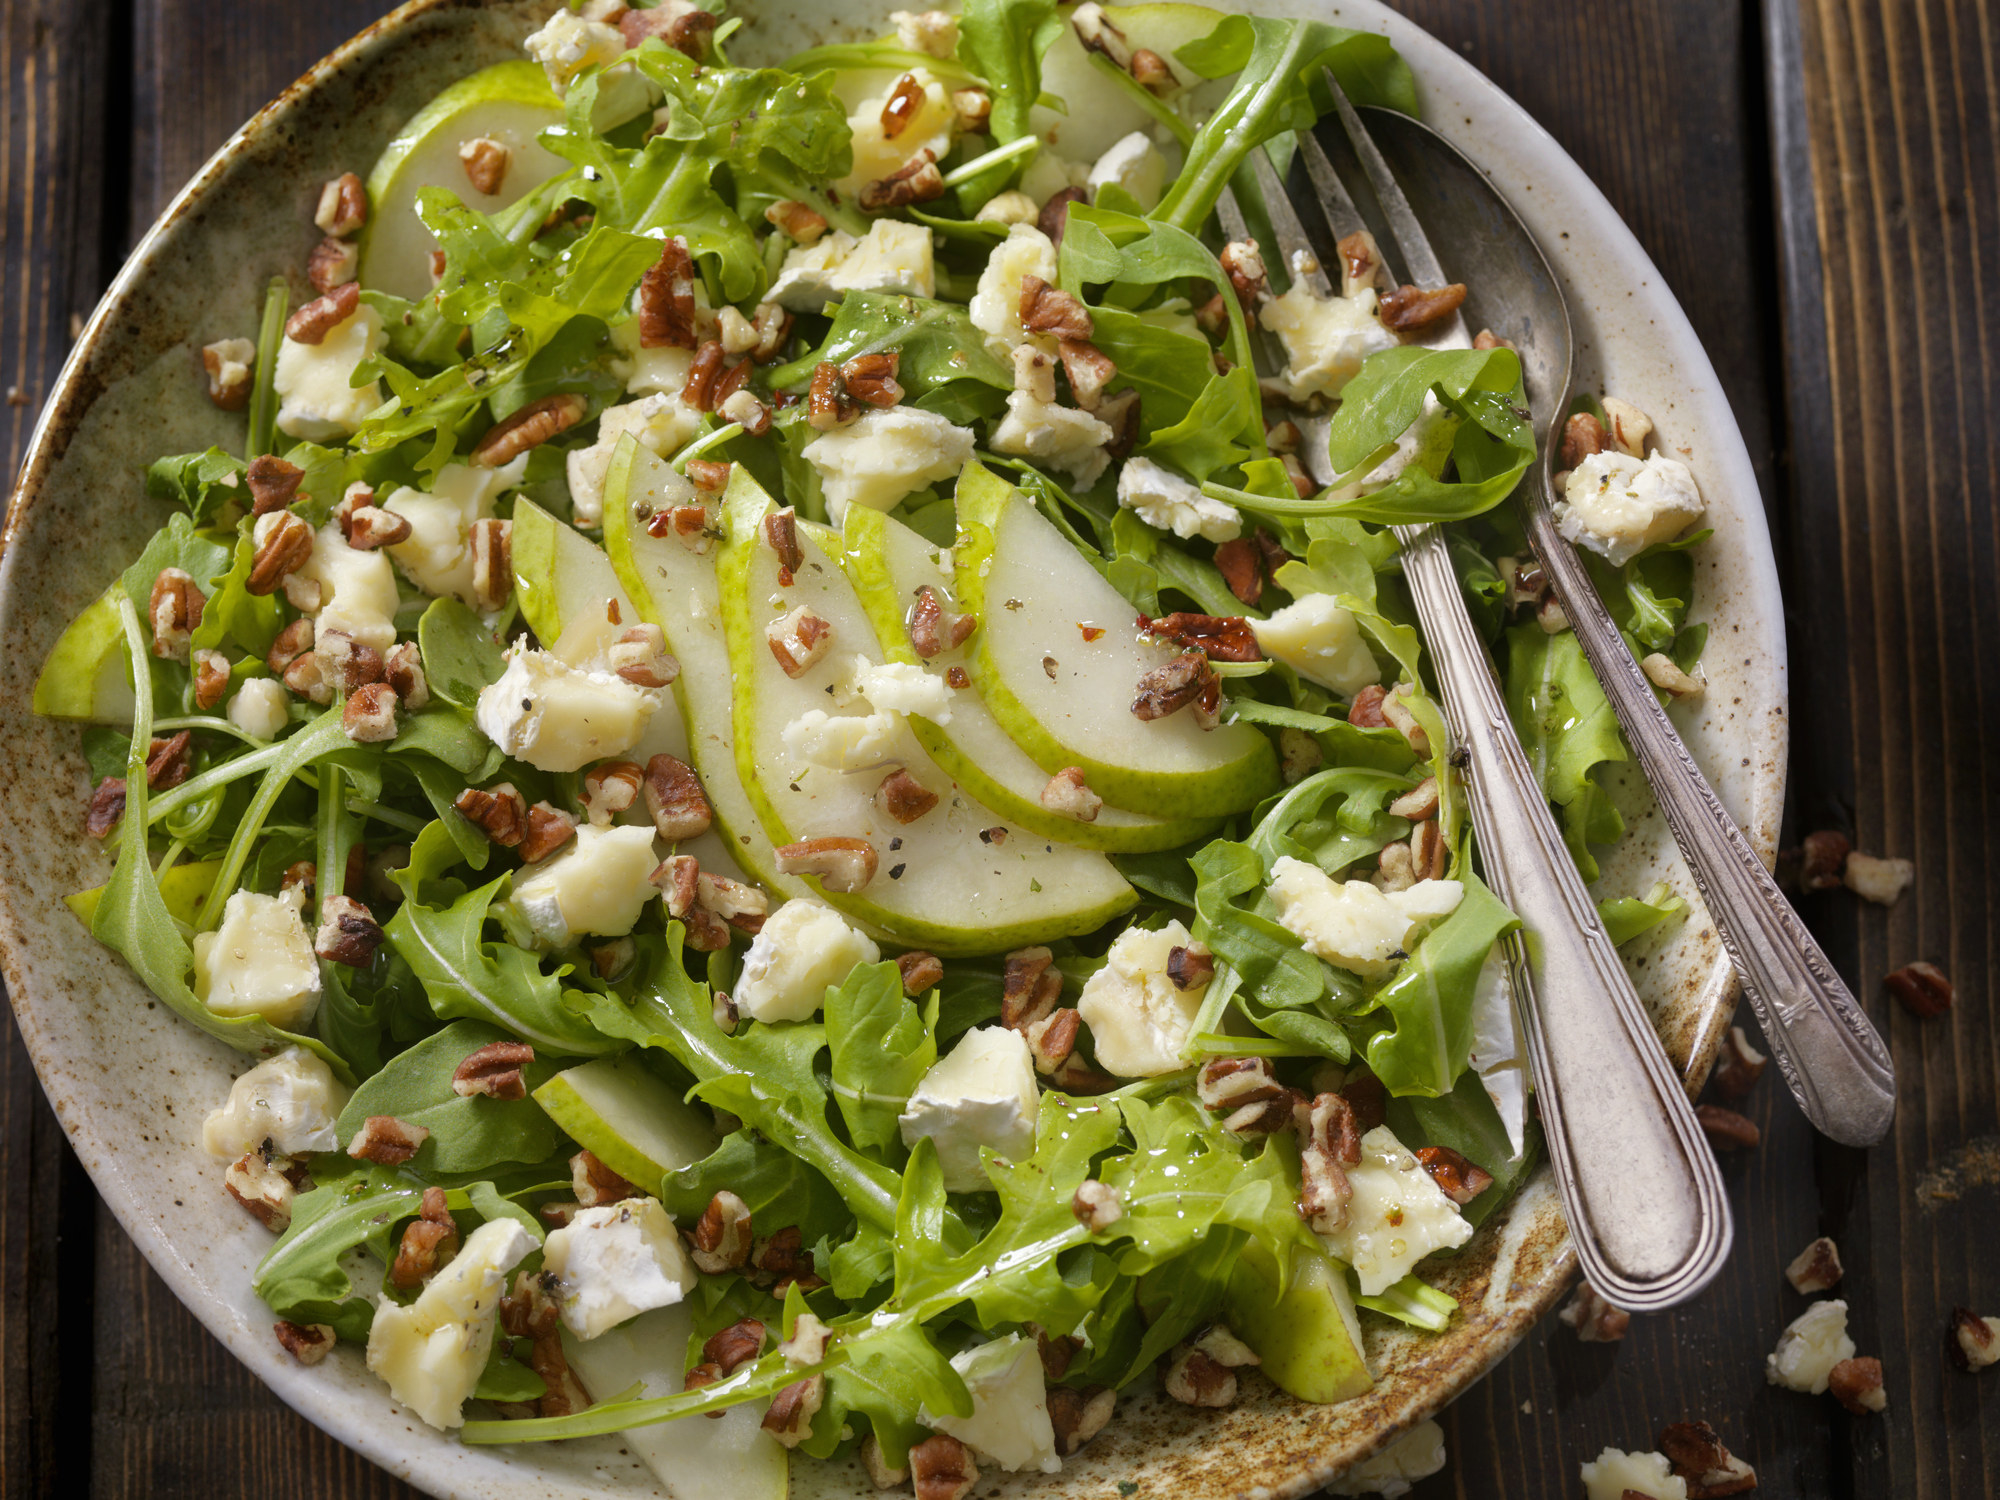 A salad with sliced pears.